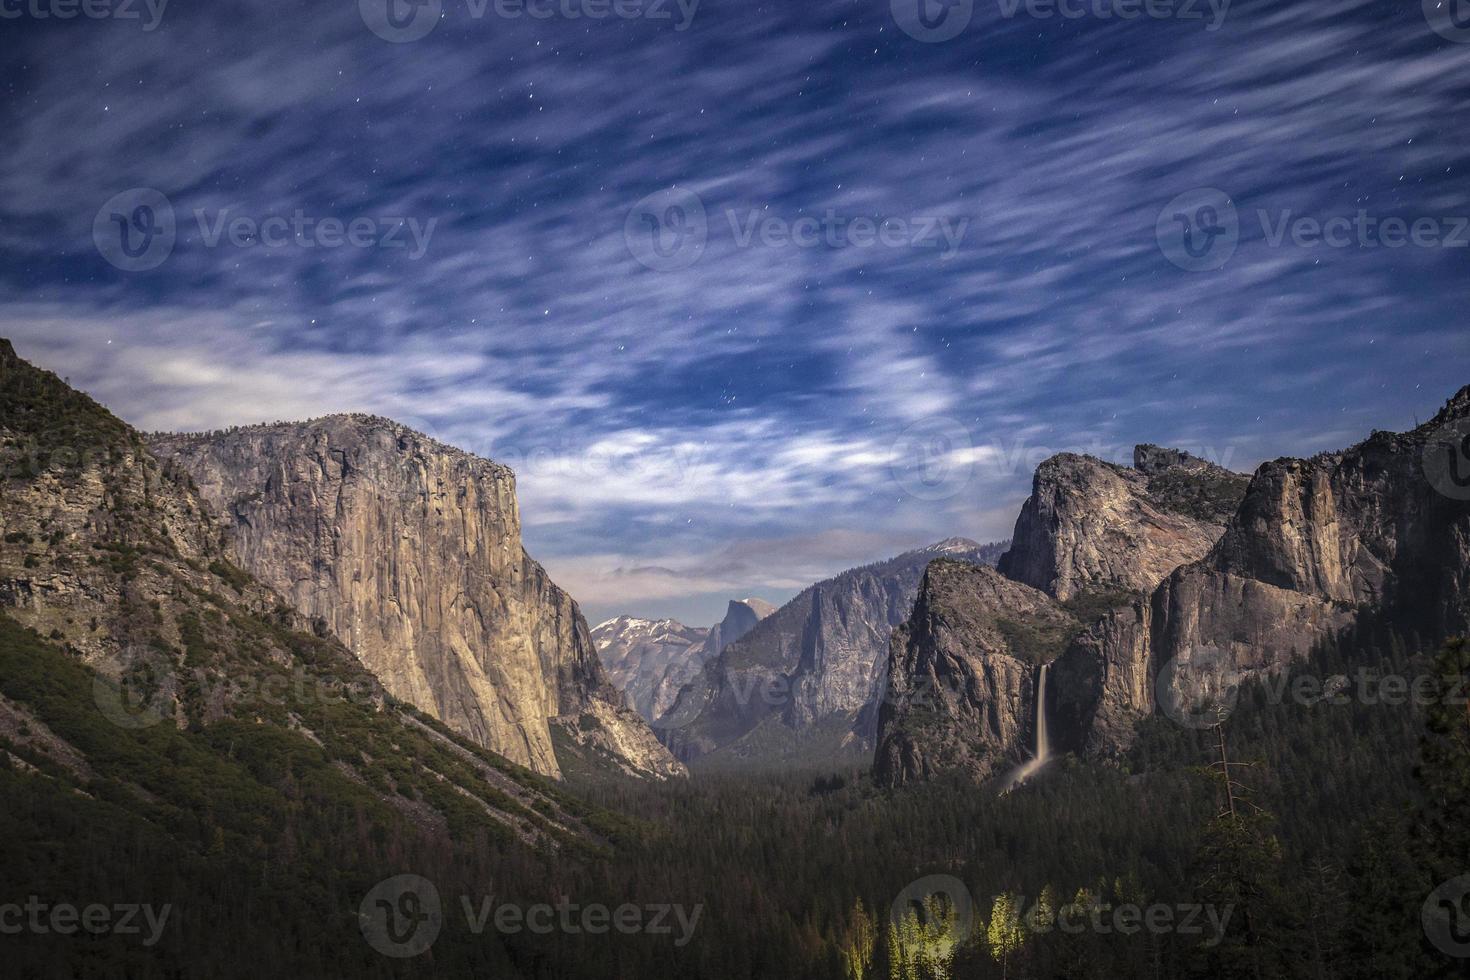 Yosemite valley as seen from Tunnel View during a full moon night with passing clouds, CA, USA photo